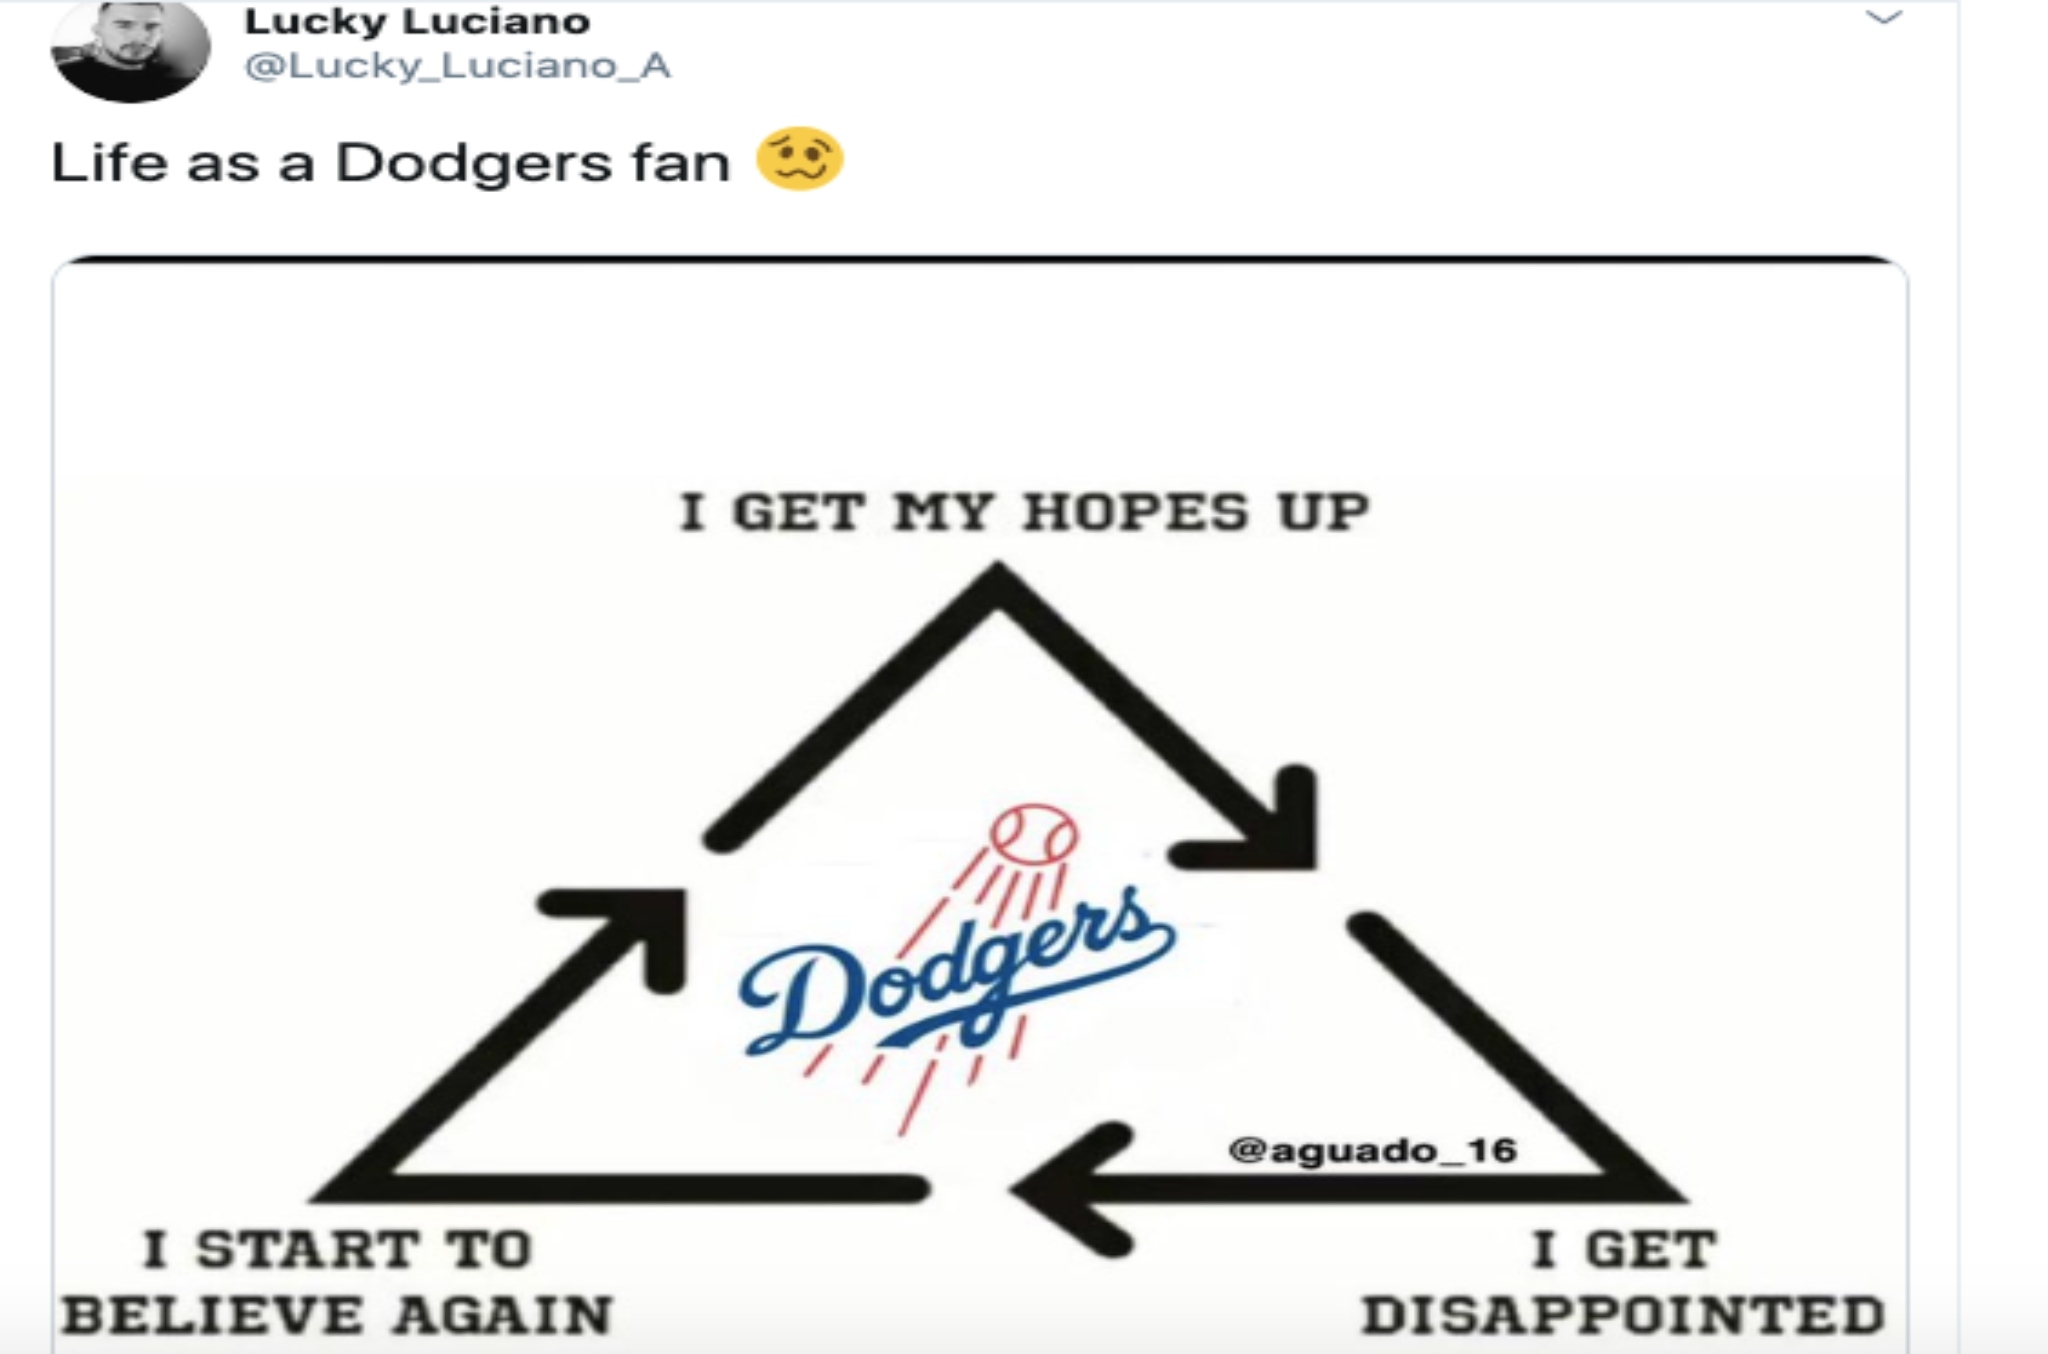 Giants fans mock Dodgers after yet another October collapse